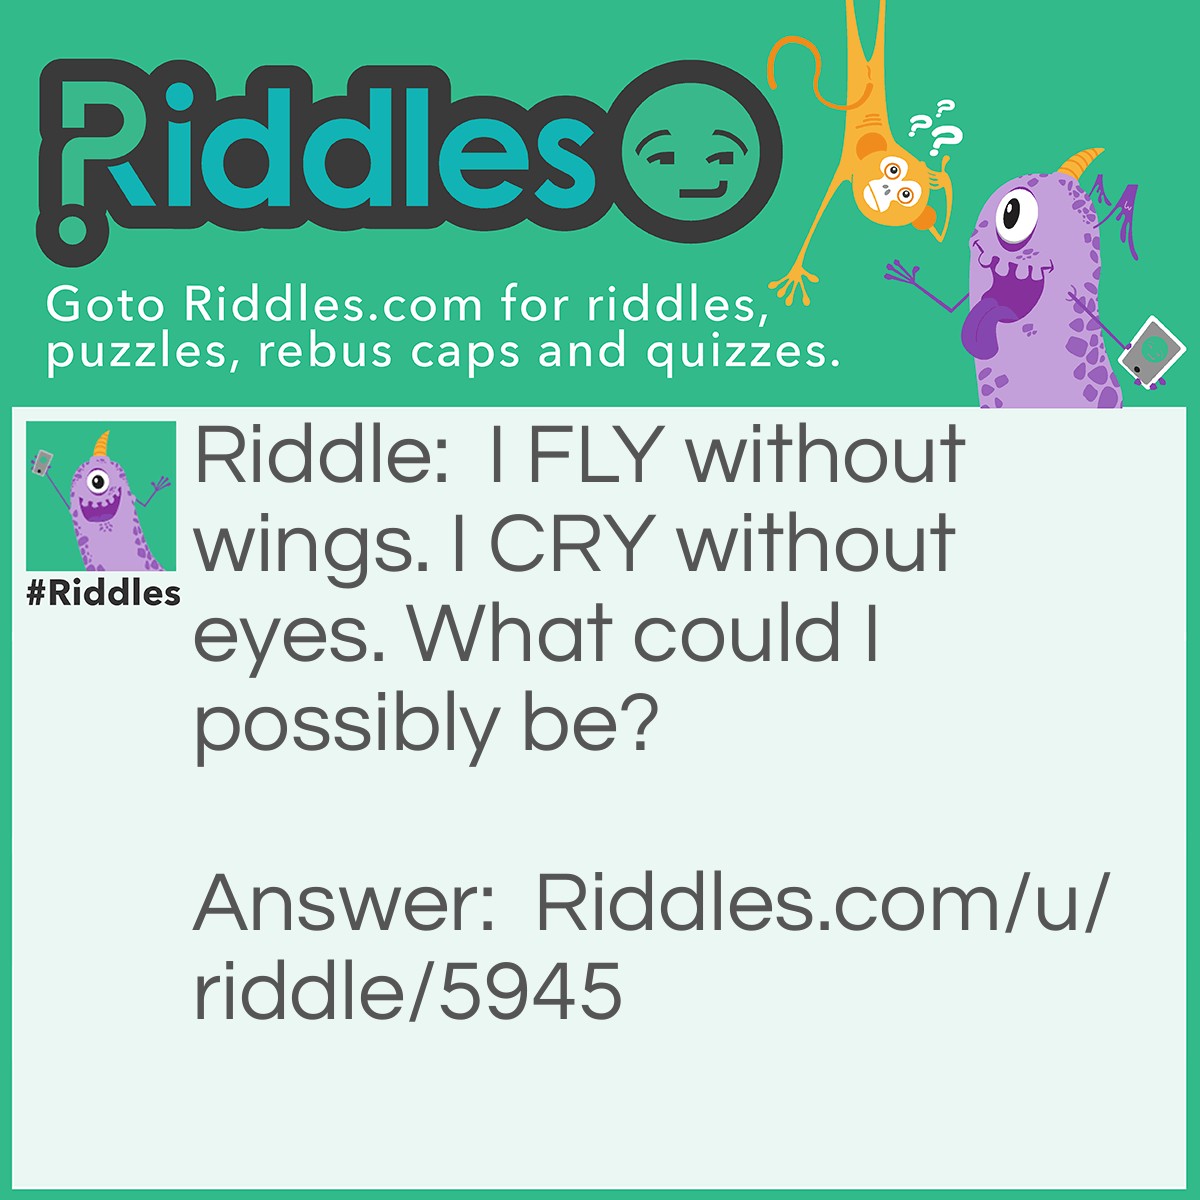 Riddle: I FLY without wings. I CRY without eyes. What could I possibly be? Answer: A cloud!